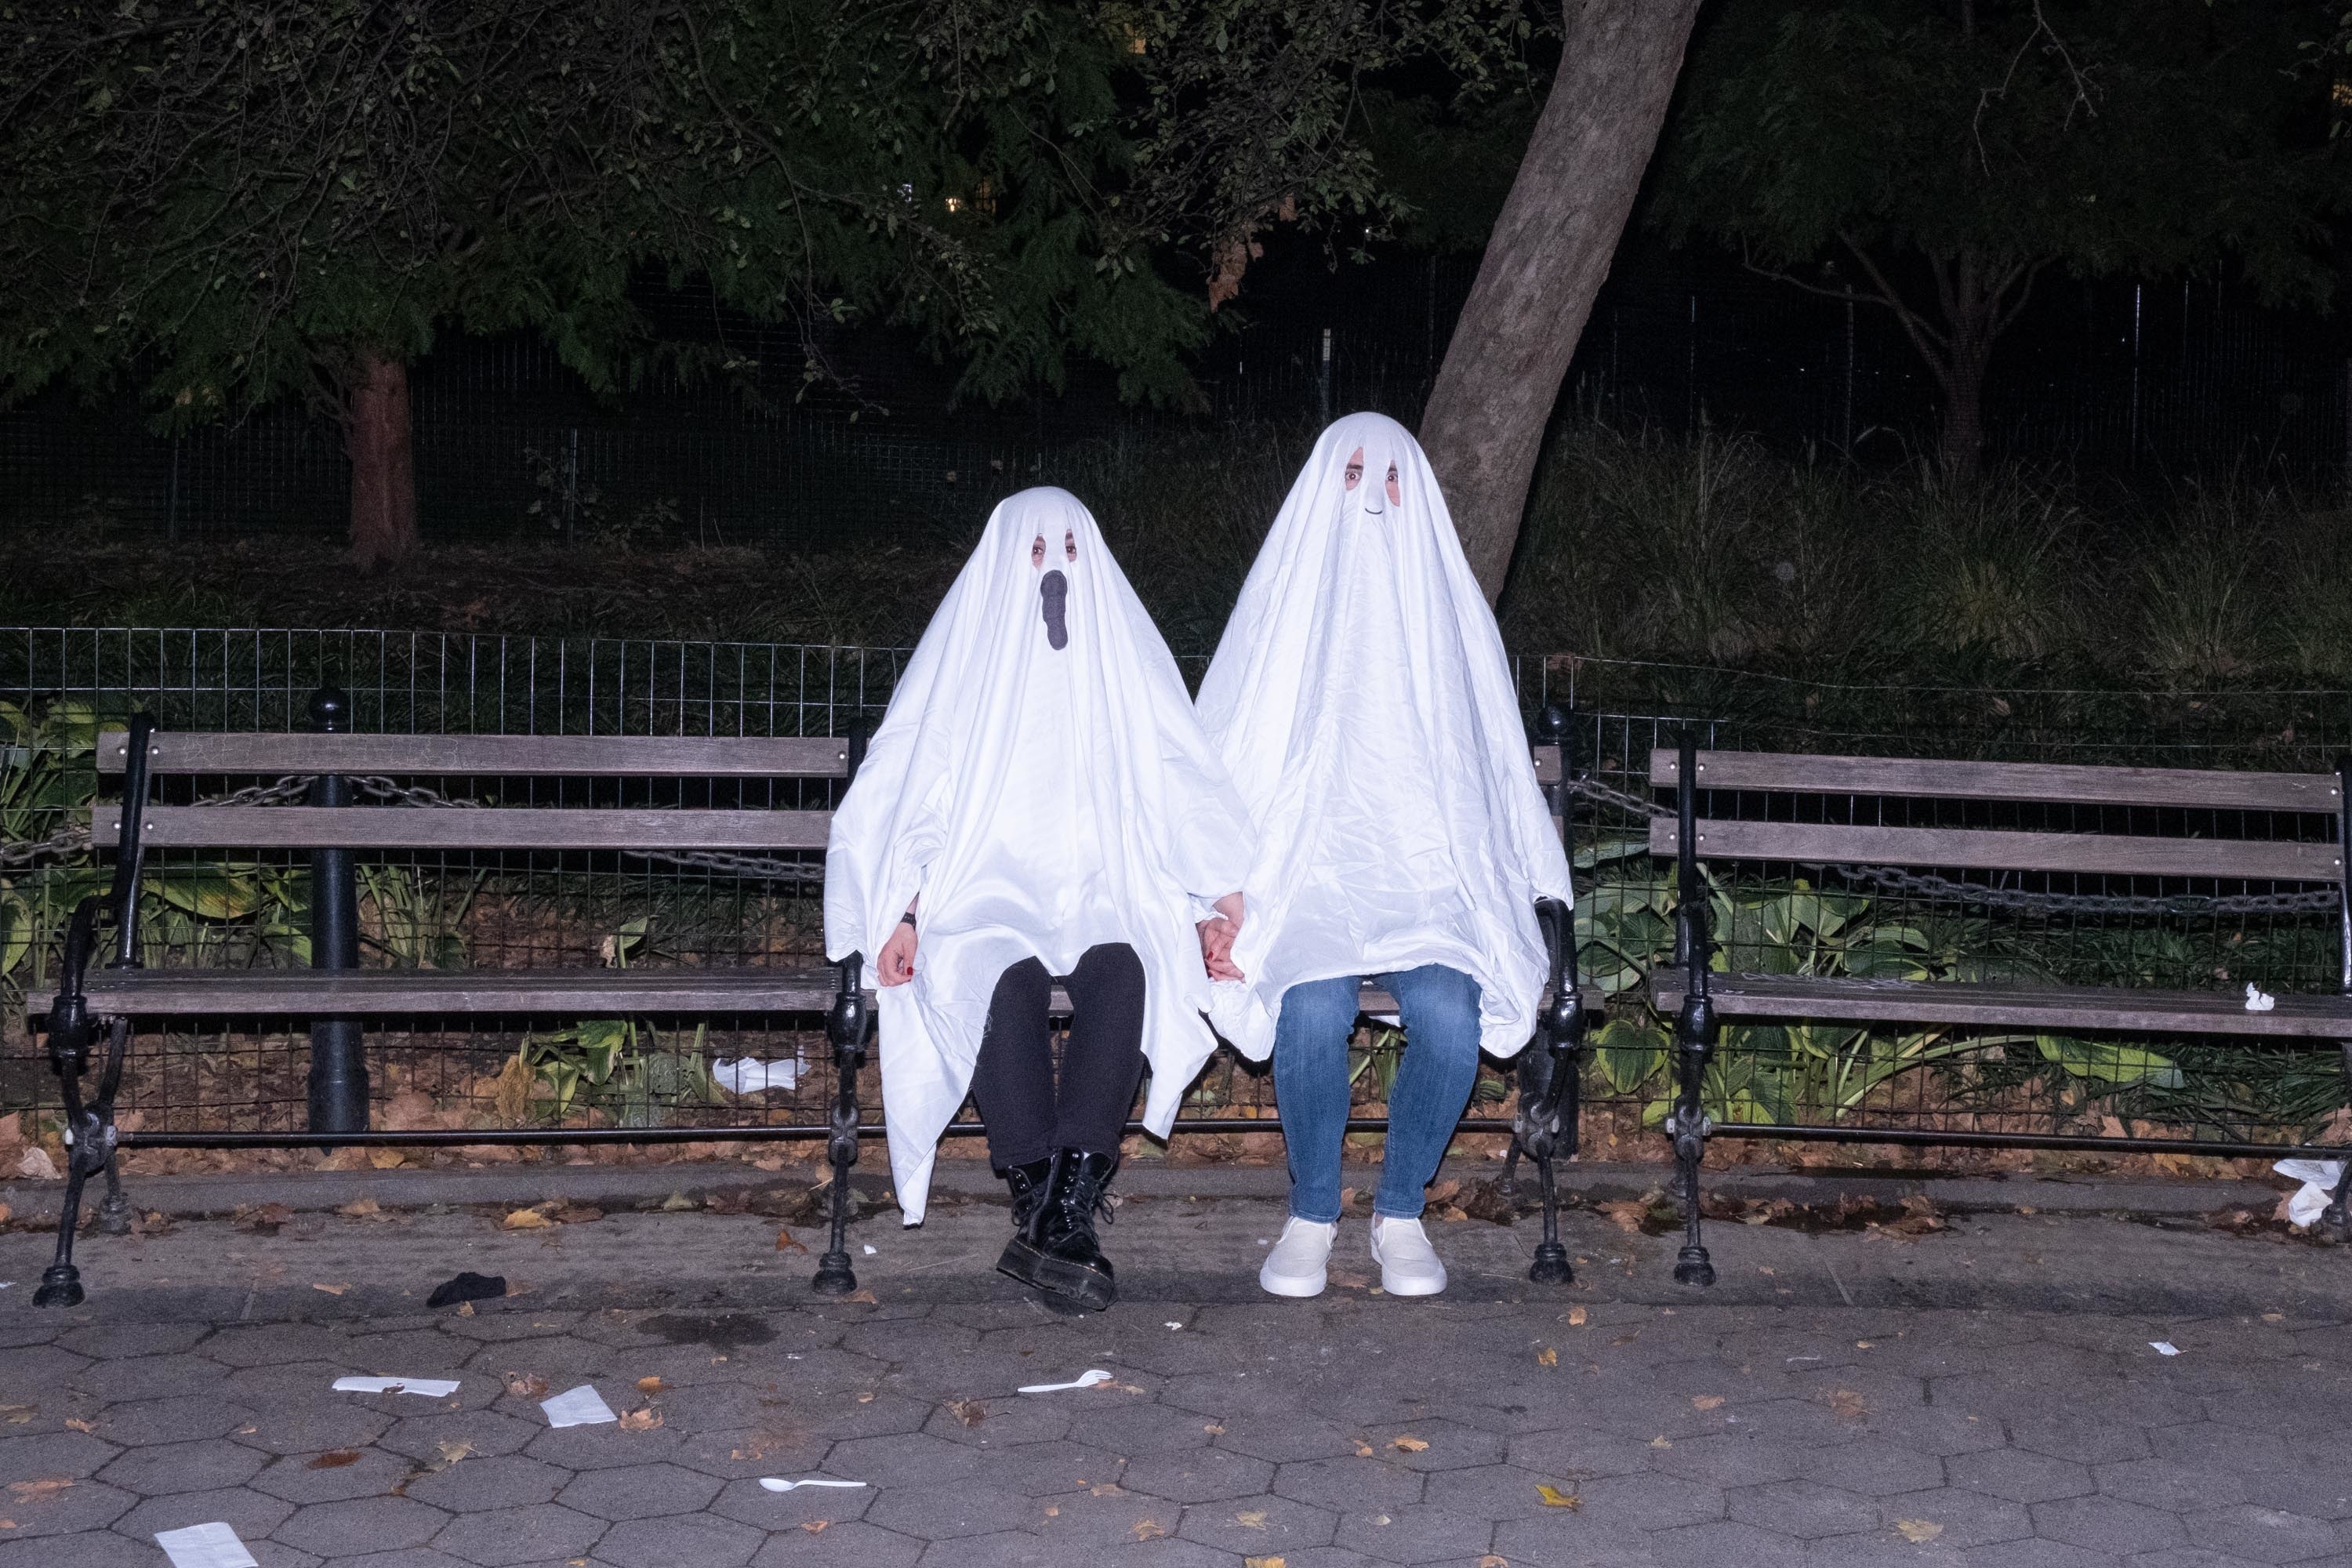 Two people on a bench with sheets over their heads, dressed like ghosts